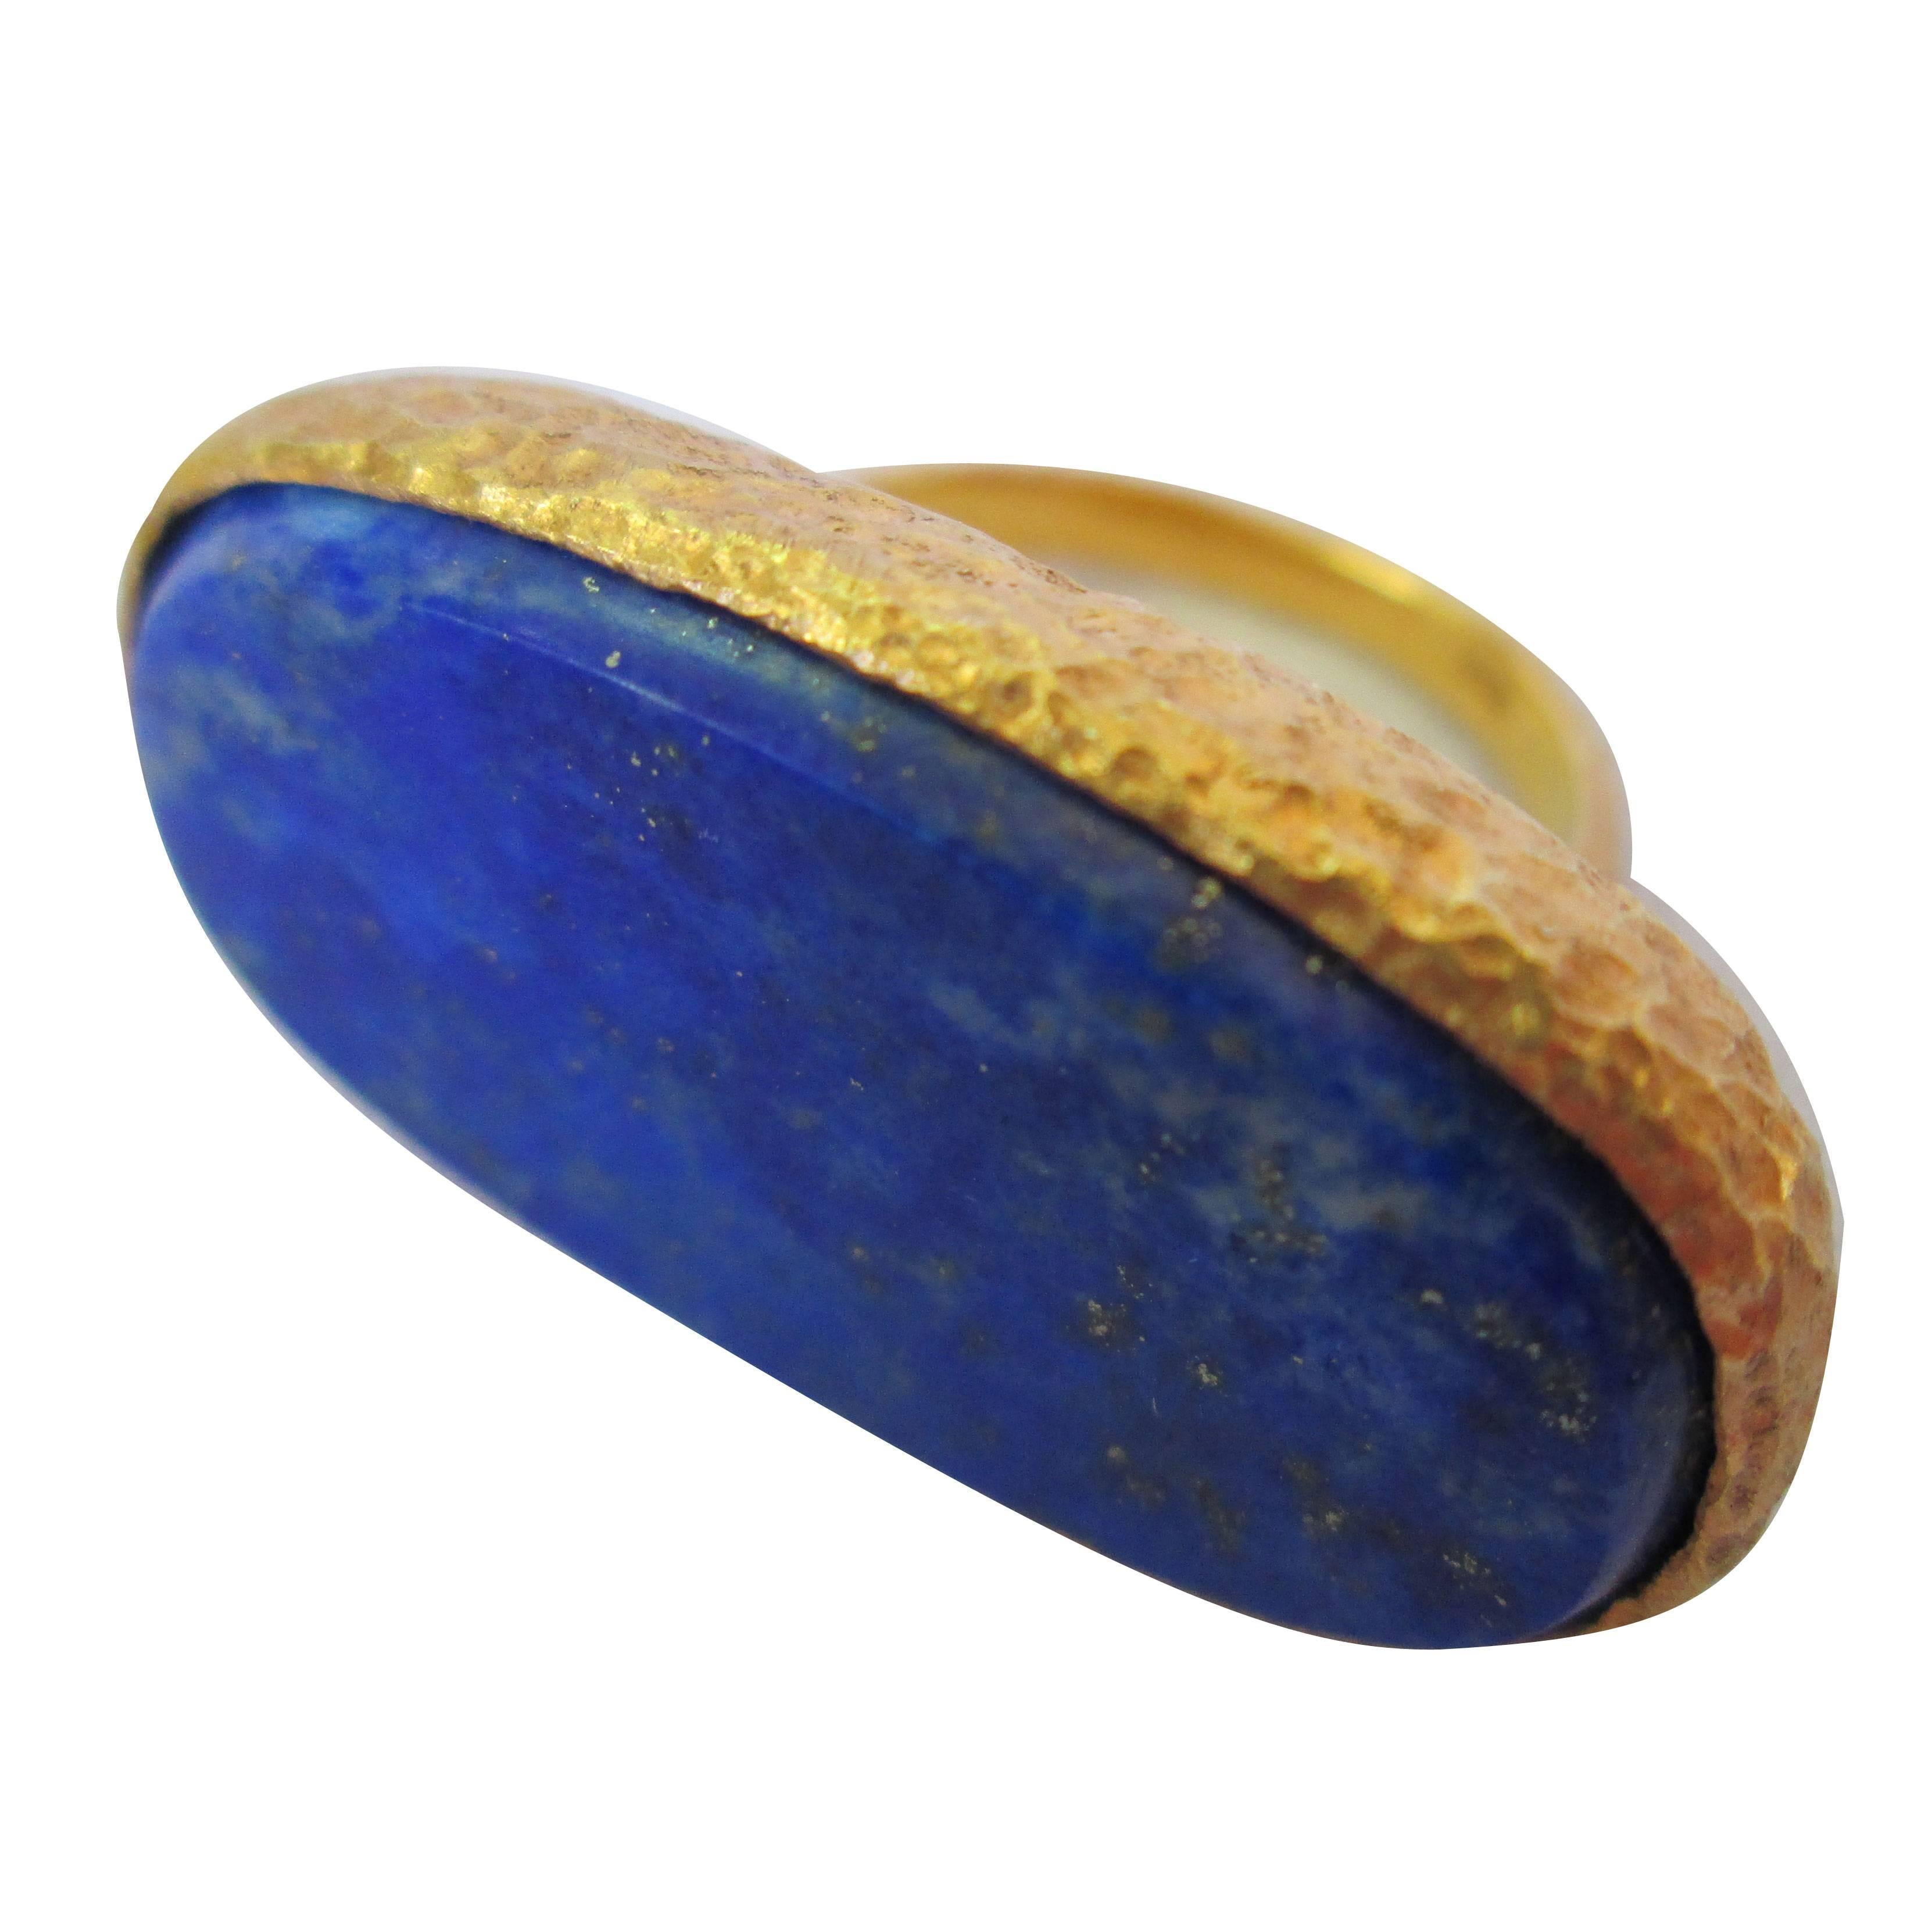 Large Oval Lapis Lazuli Stone In Hand Hammered Gold Ring By Marina J. 2016